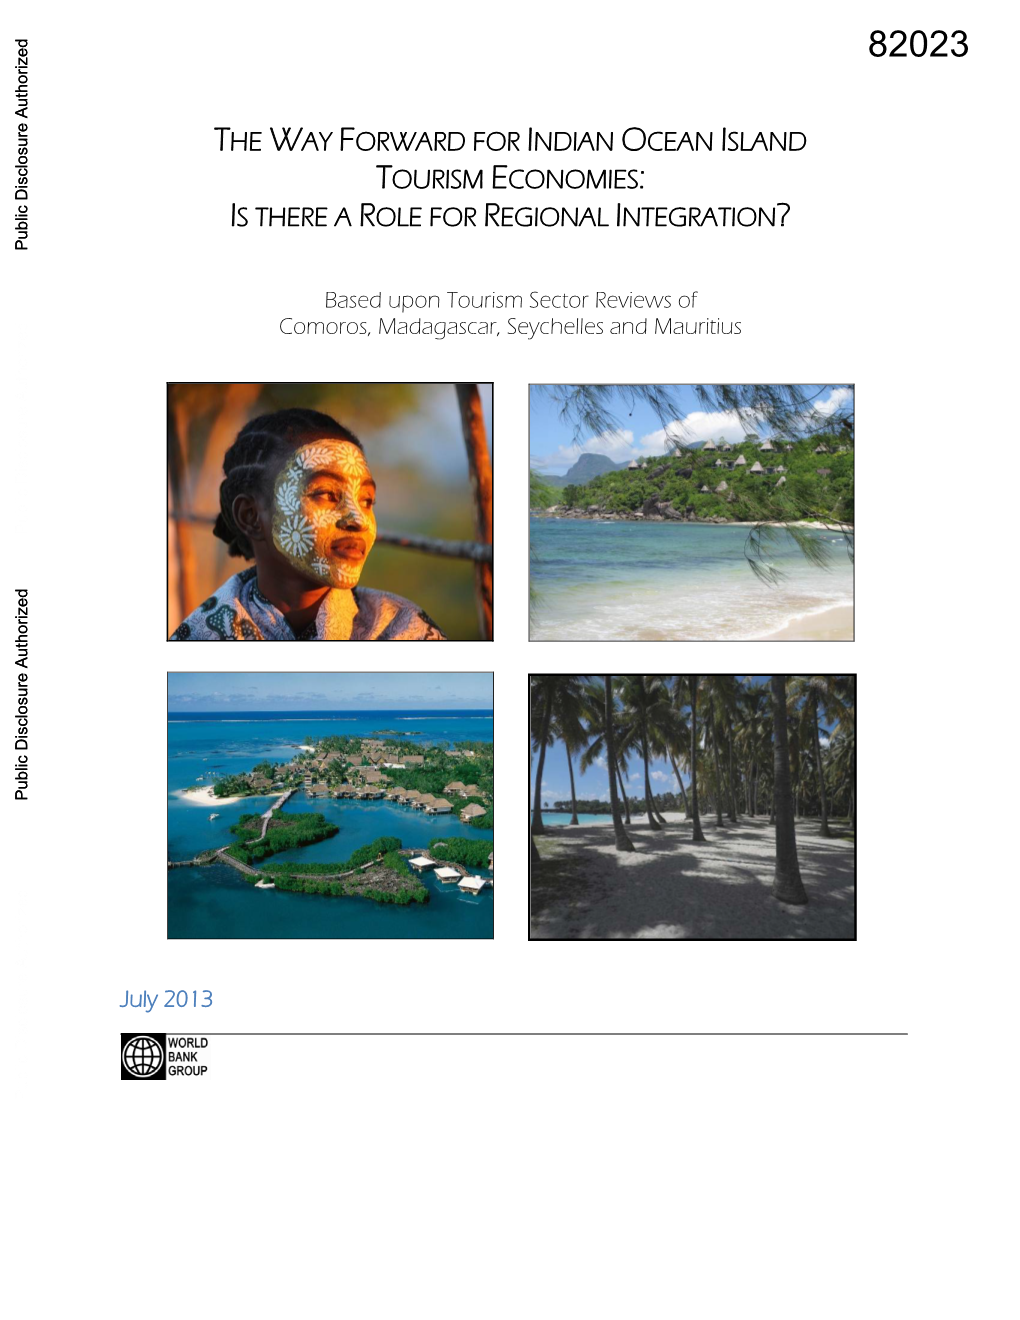 The Way Forward for Indian Ocean Island Tourism Economies